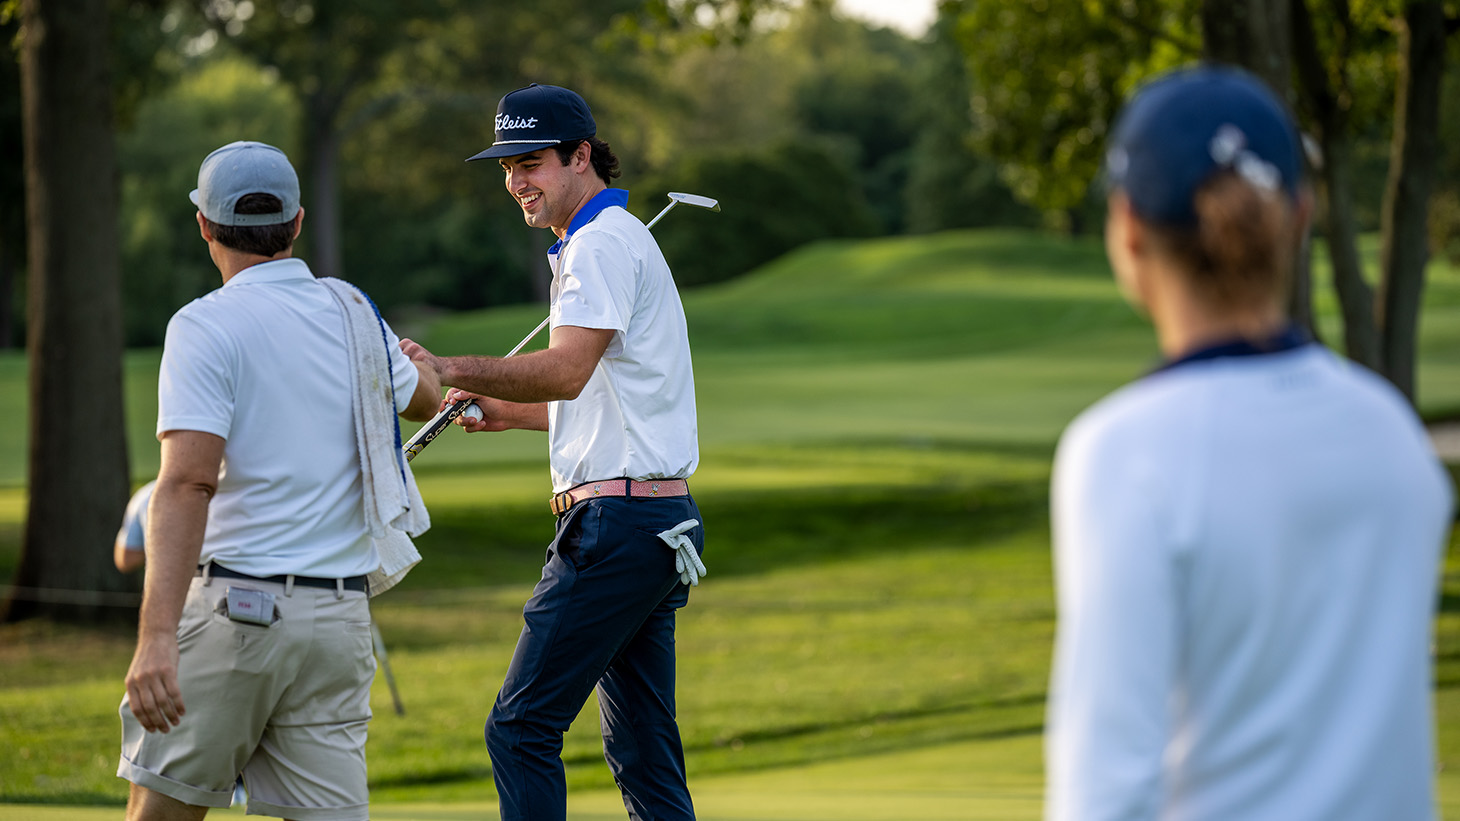 Tim gets a fist-bump from his caddie after...